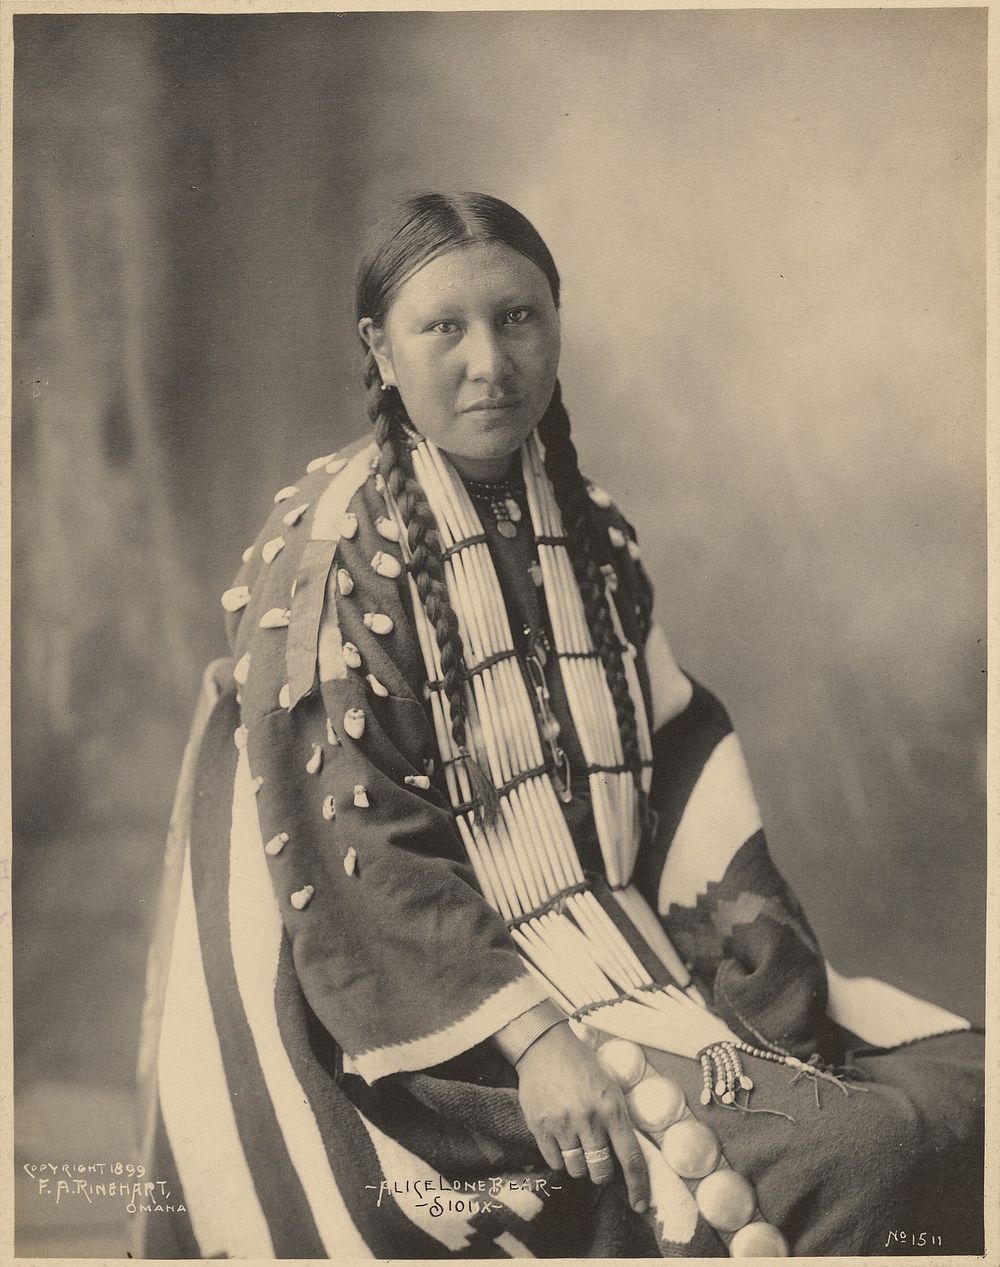 Alice Lone Bear, Sioux by Adolph F Muhr and Frank A Rinehart